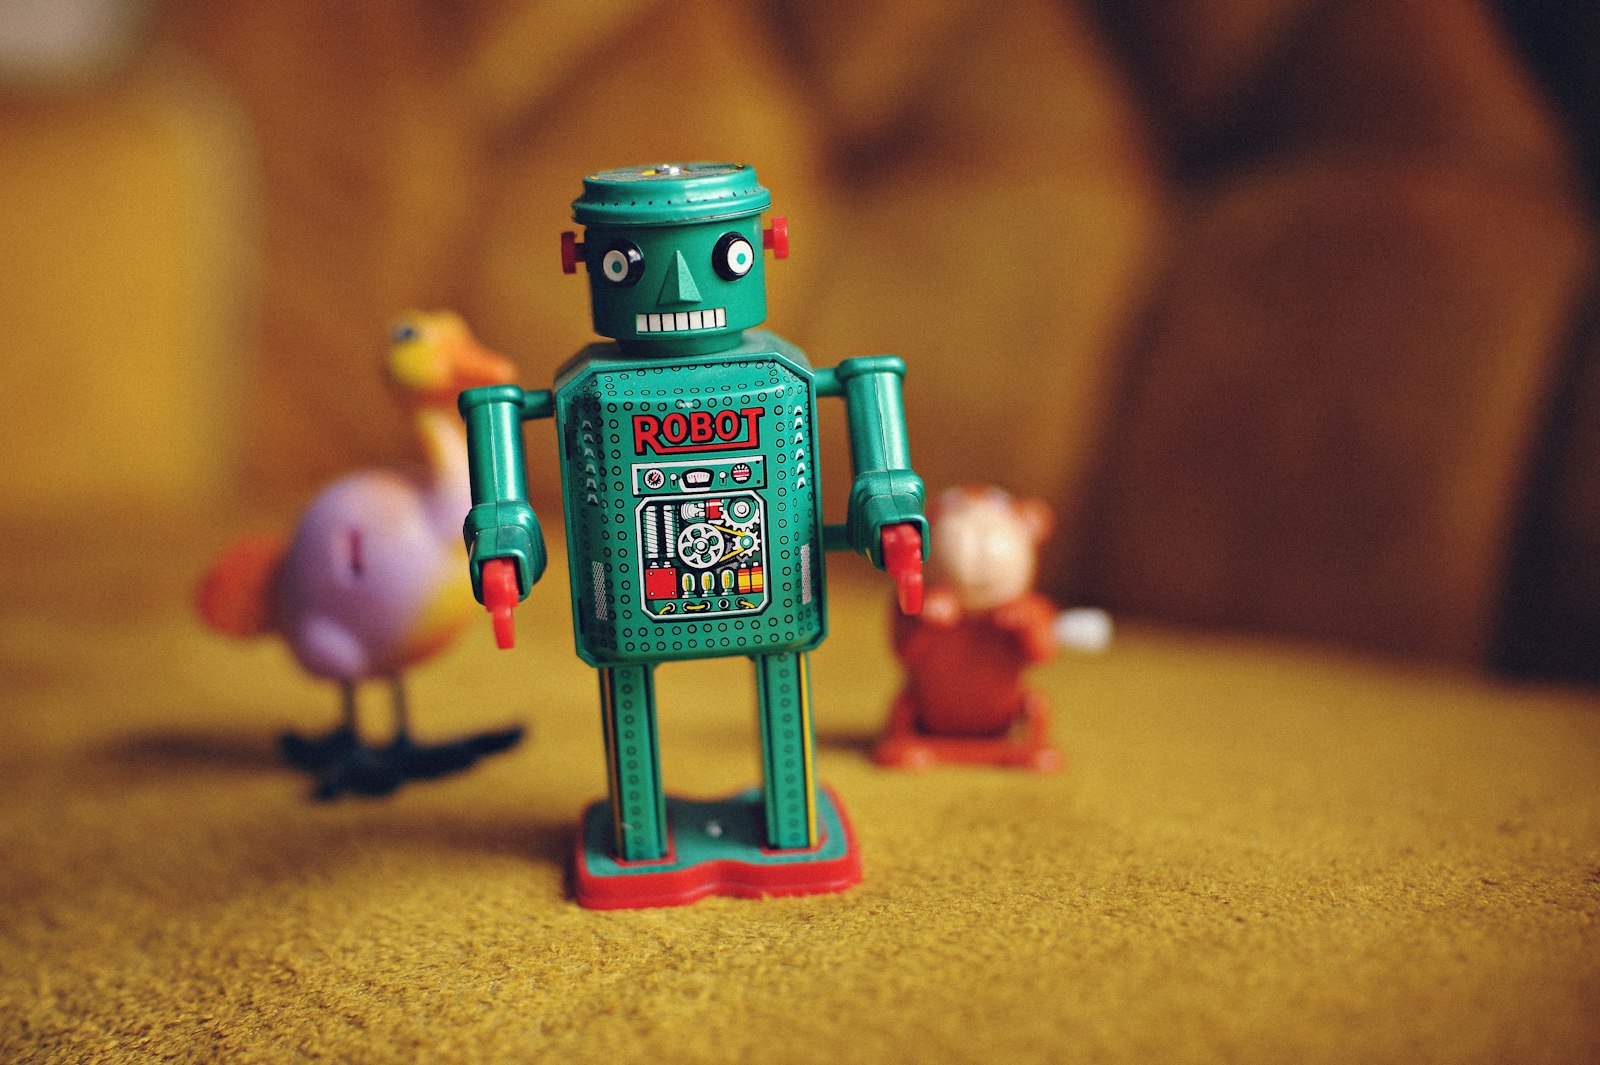 Nikon D3 sample photo. Green and multicolored robot photography